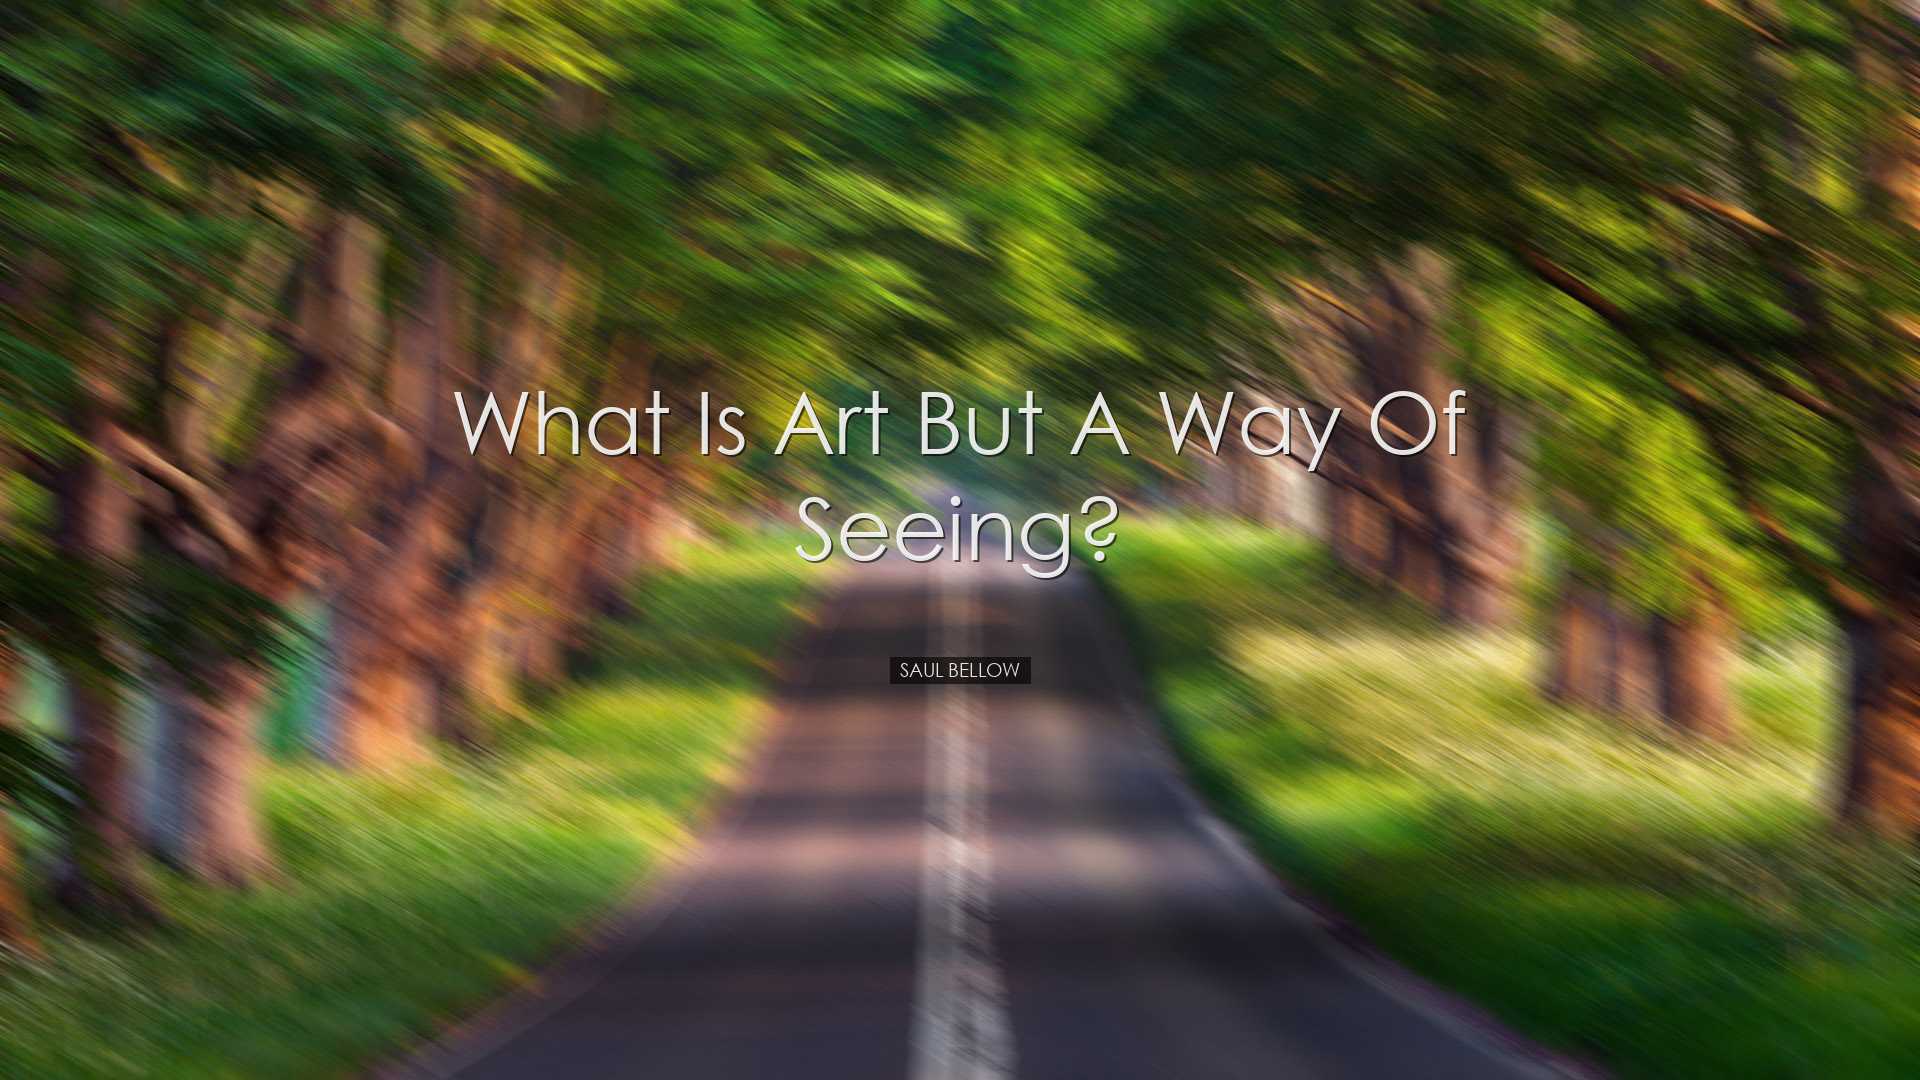 What is art but a way of seeing? - Saul Bellow